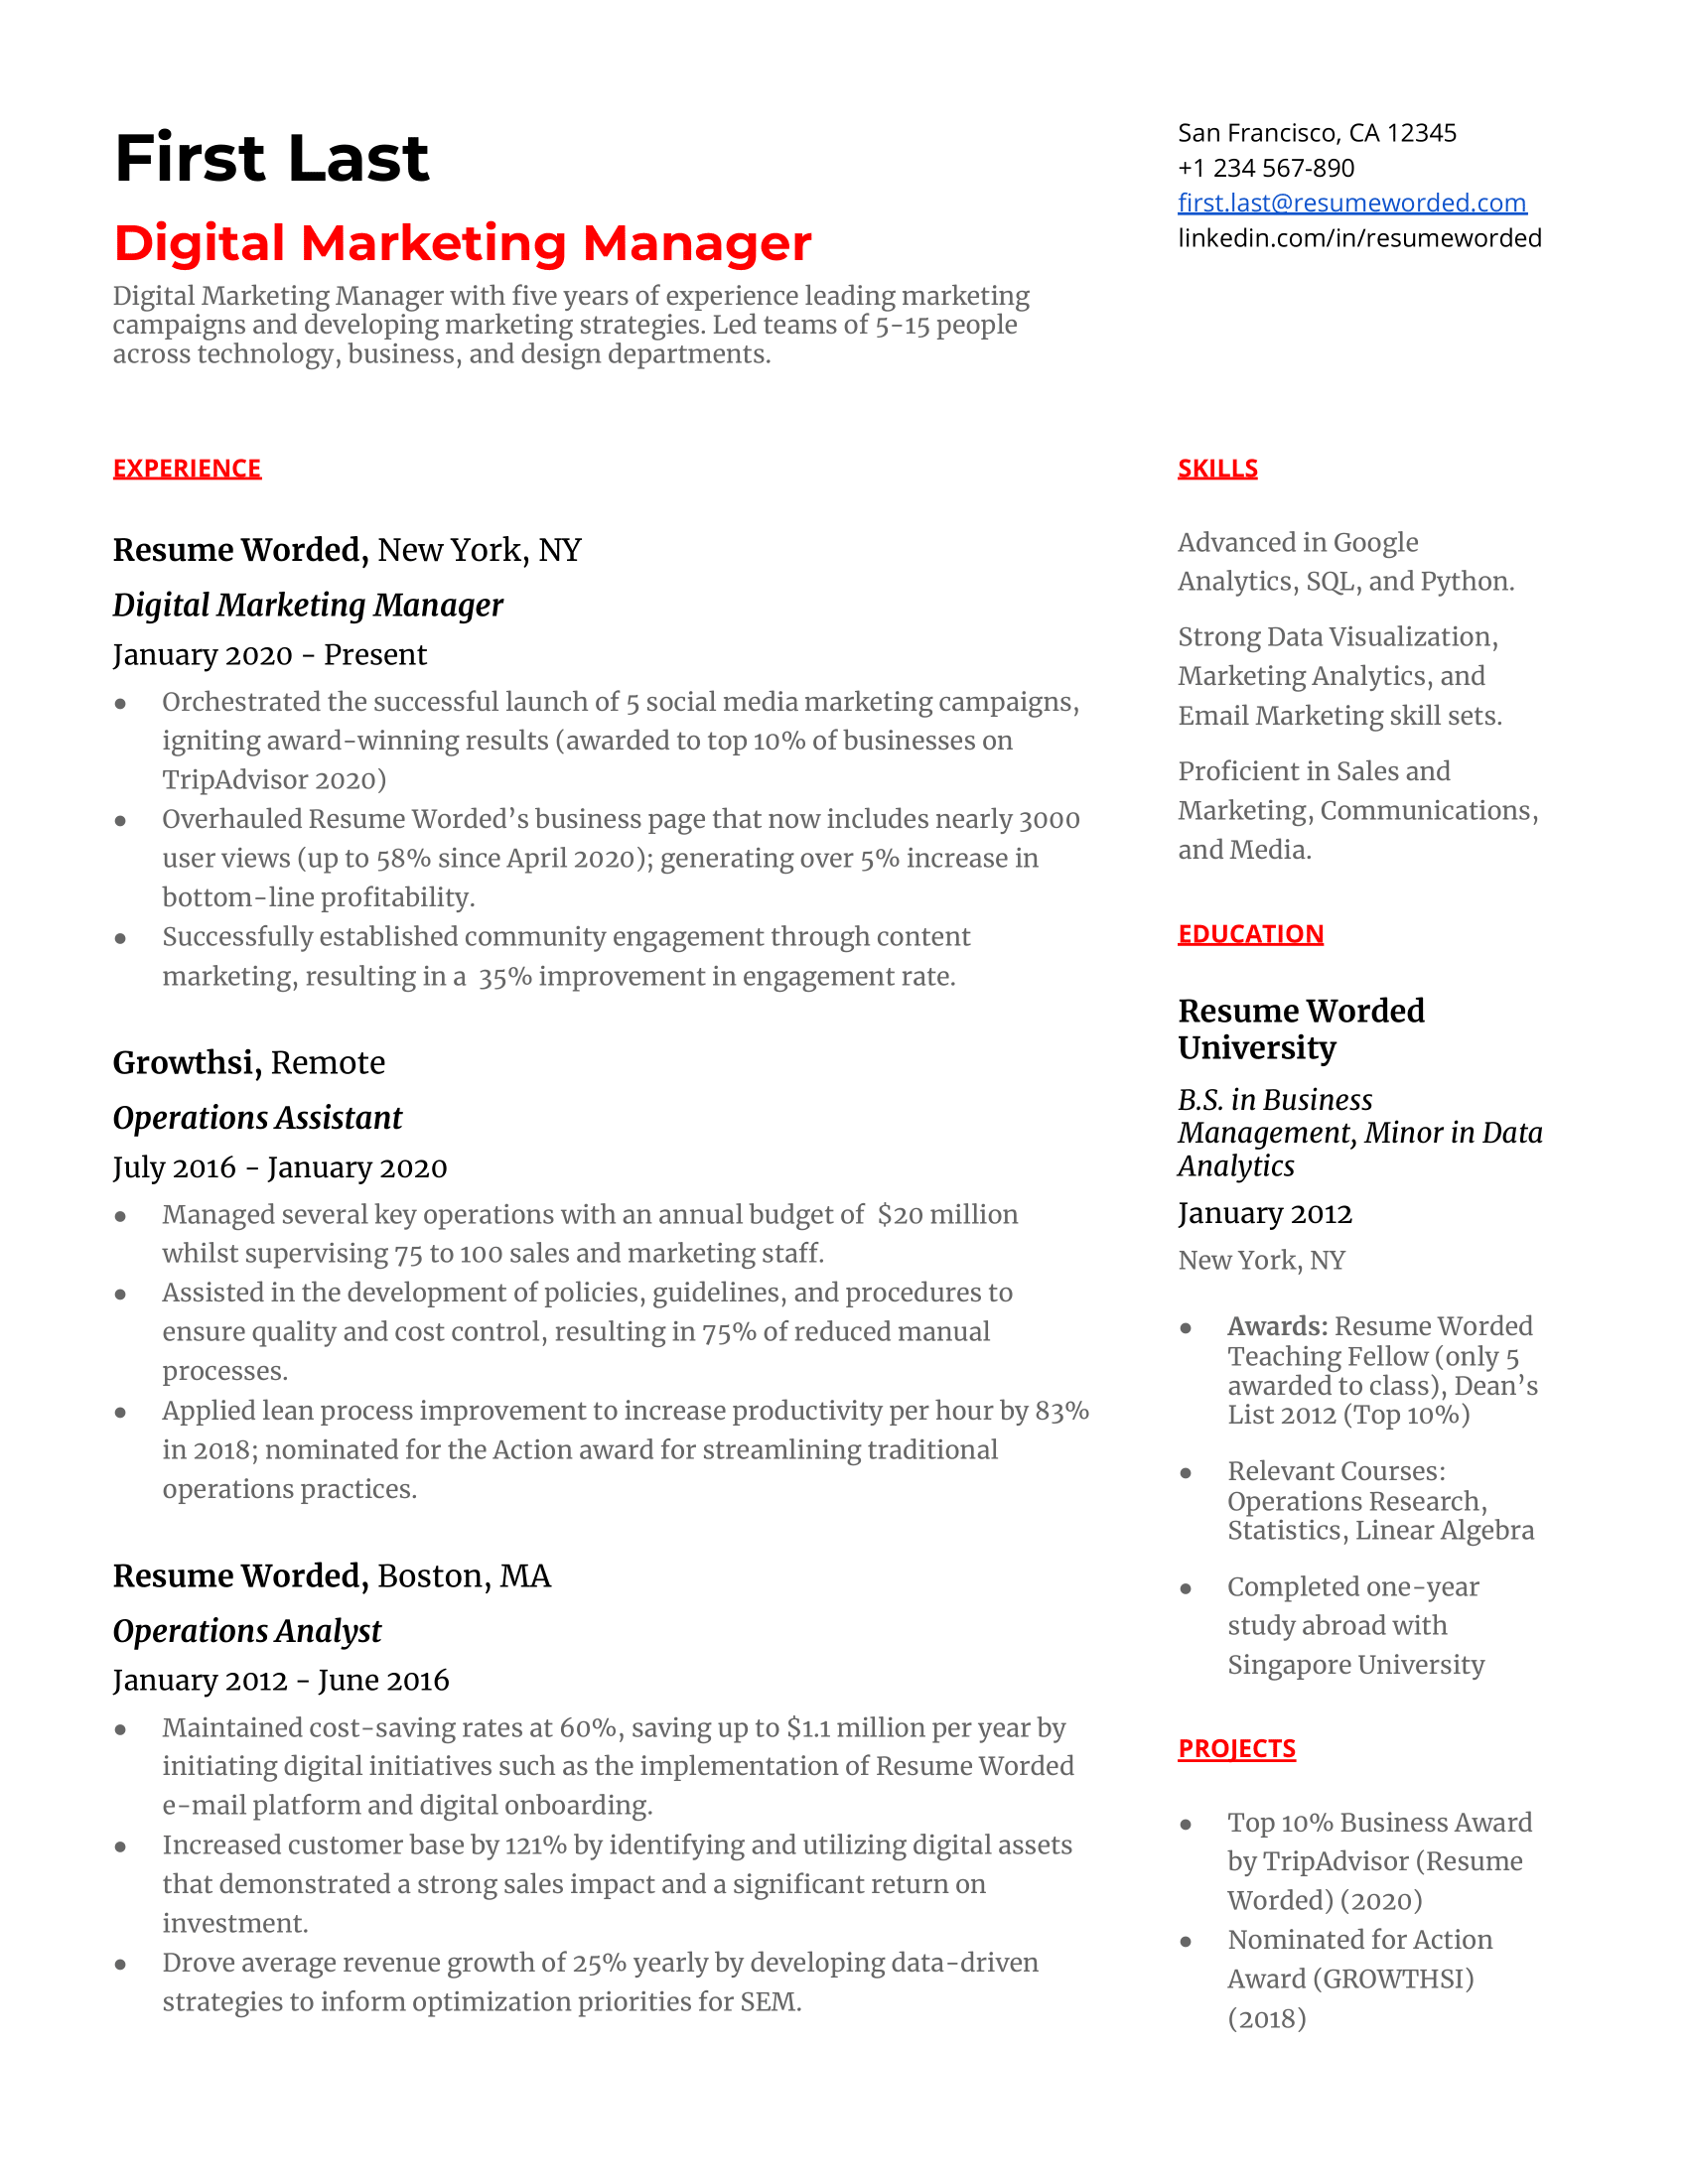 A Digital Marketing Manager's CV highlighting their passion for technology, strategic thinking, and leadership skills.